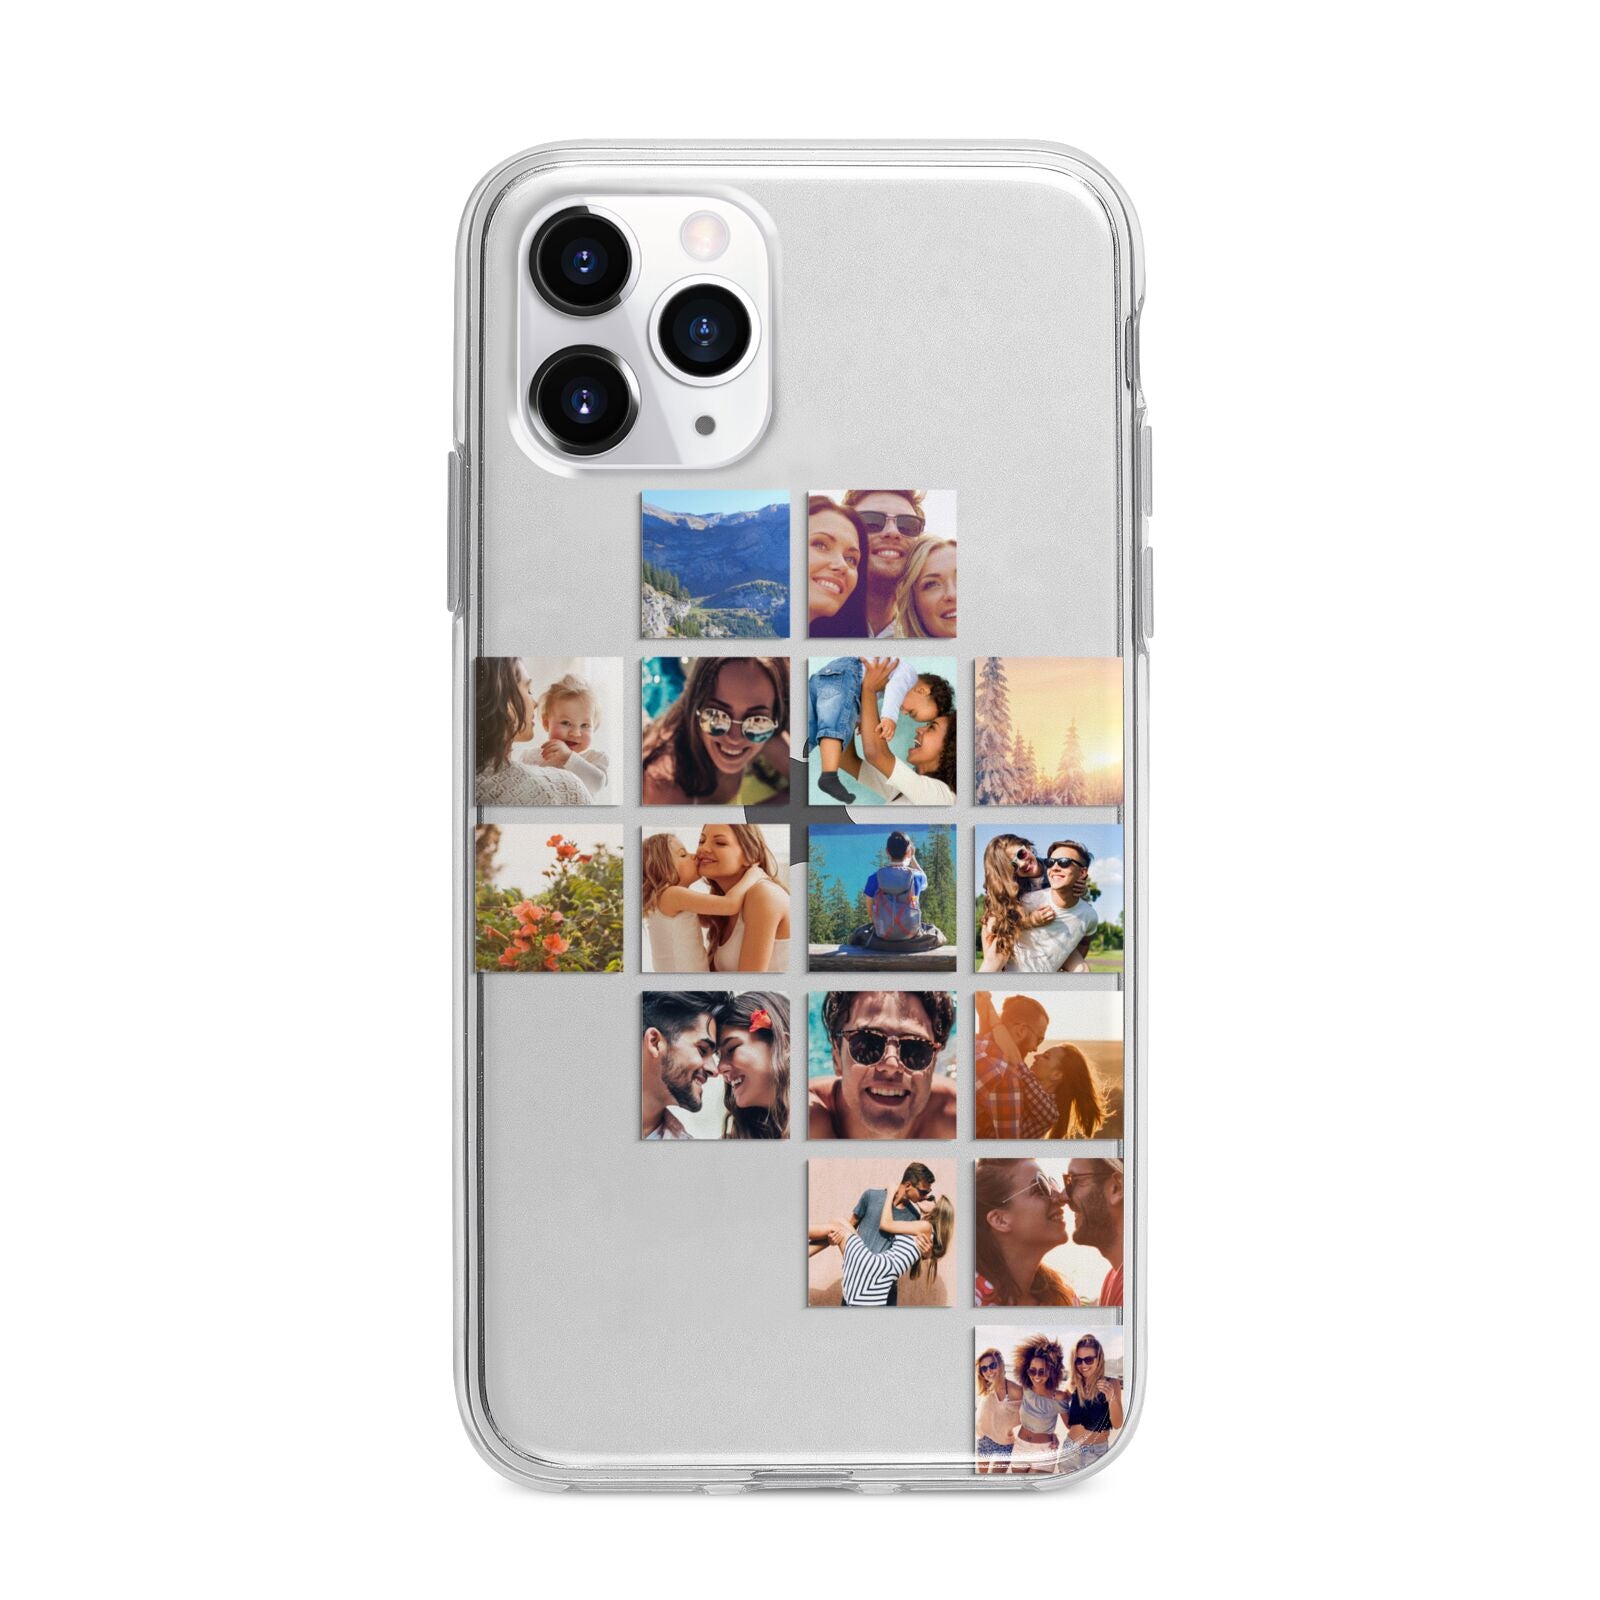 Right Diagonal Photo Montage Upload Apple iPhone 11 Pro Max in Silver with Bumper Case